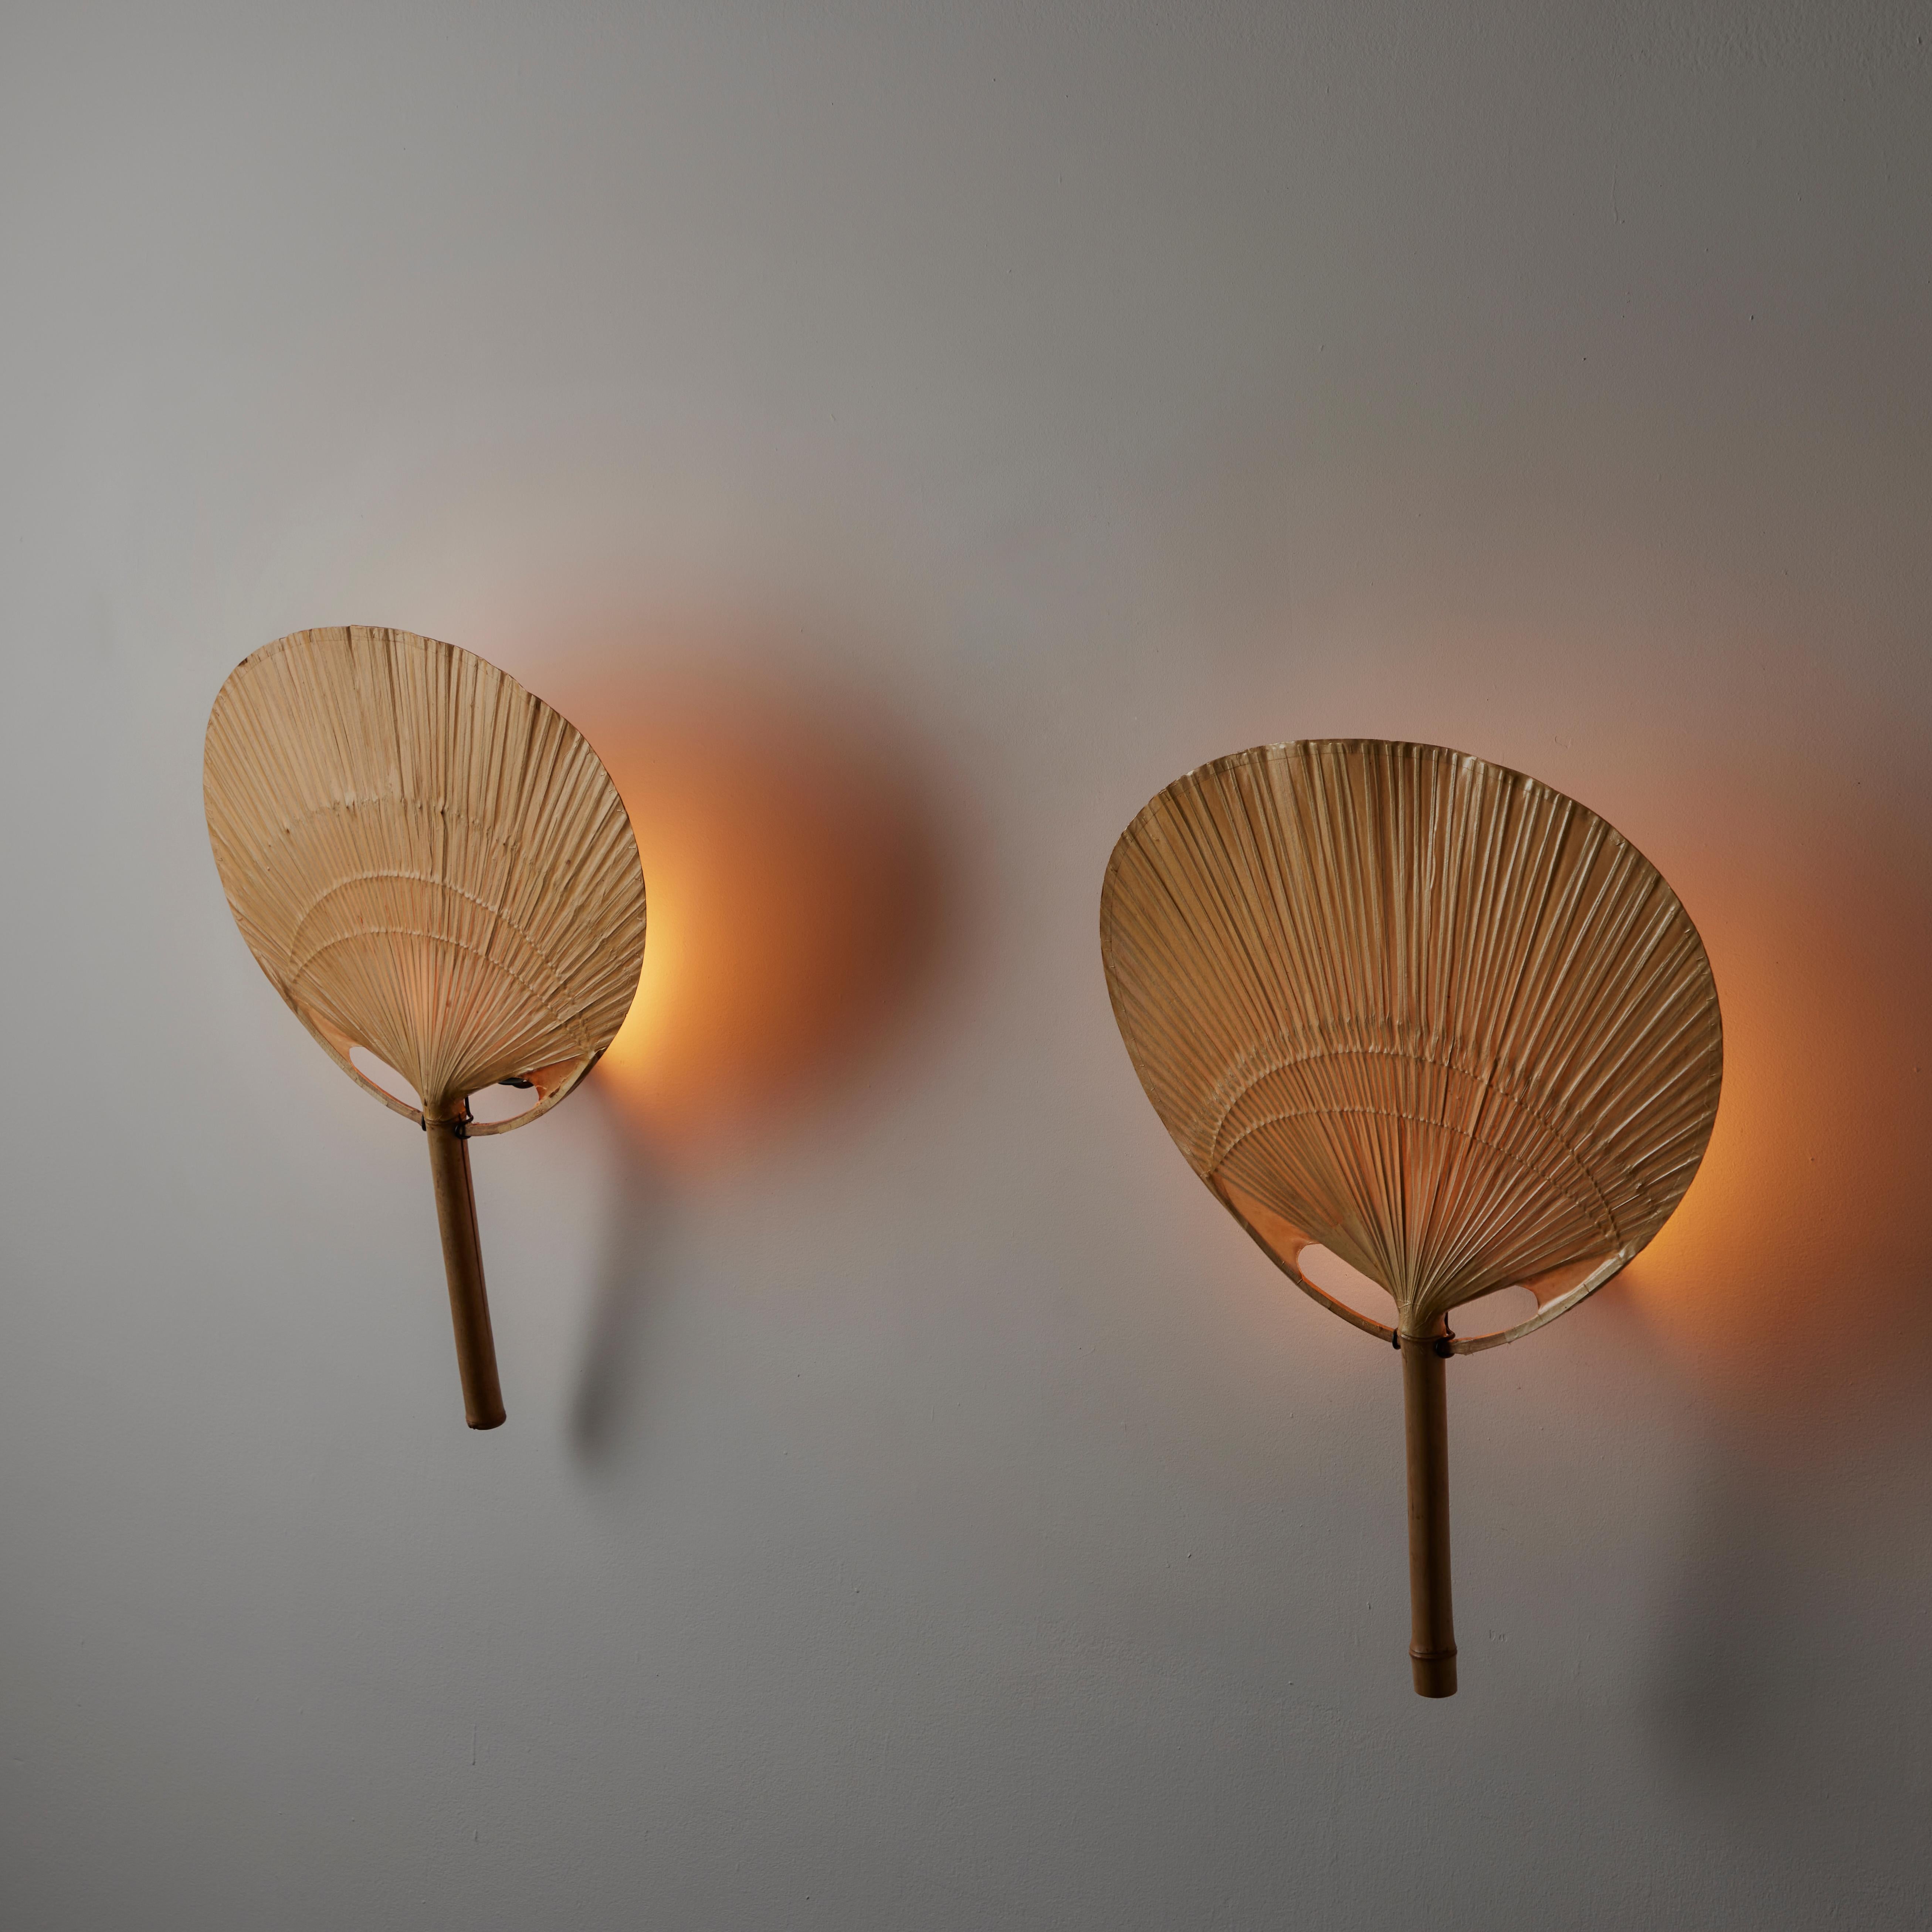 Pair of Uchiwa Sconces by Ingo Maurer. Designed and manufactured in Germany, circa 1970s. Bamboo, rice paper. Rewired for U.S. Standards. Each light takes one E27 40w maximum bulb. Bulbs provided as a one time courtesy. Sold as a pair only. 